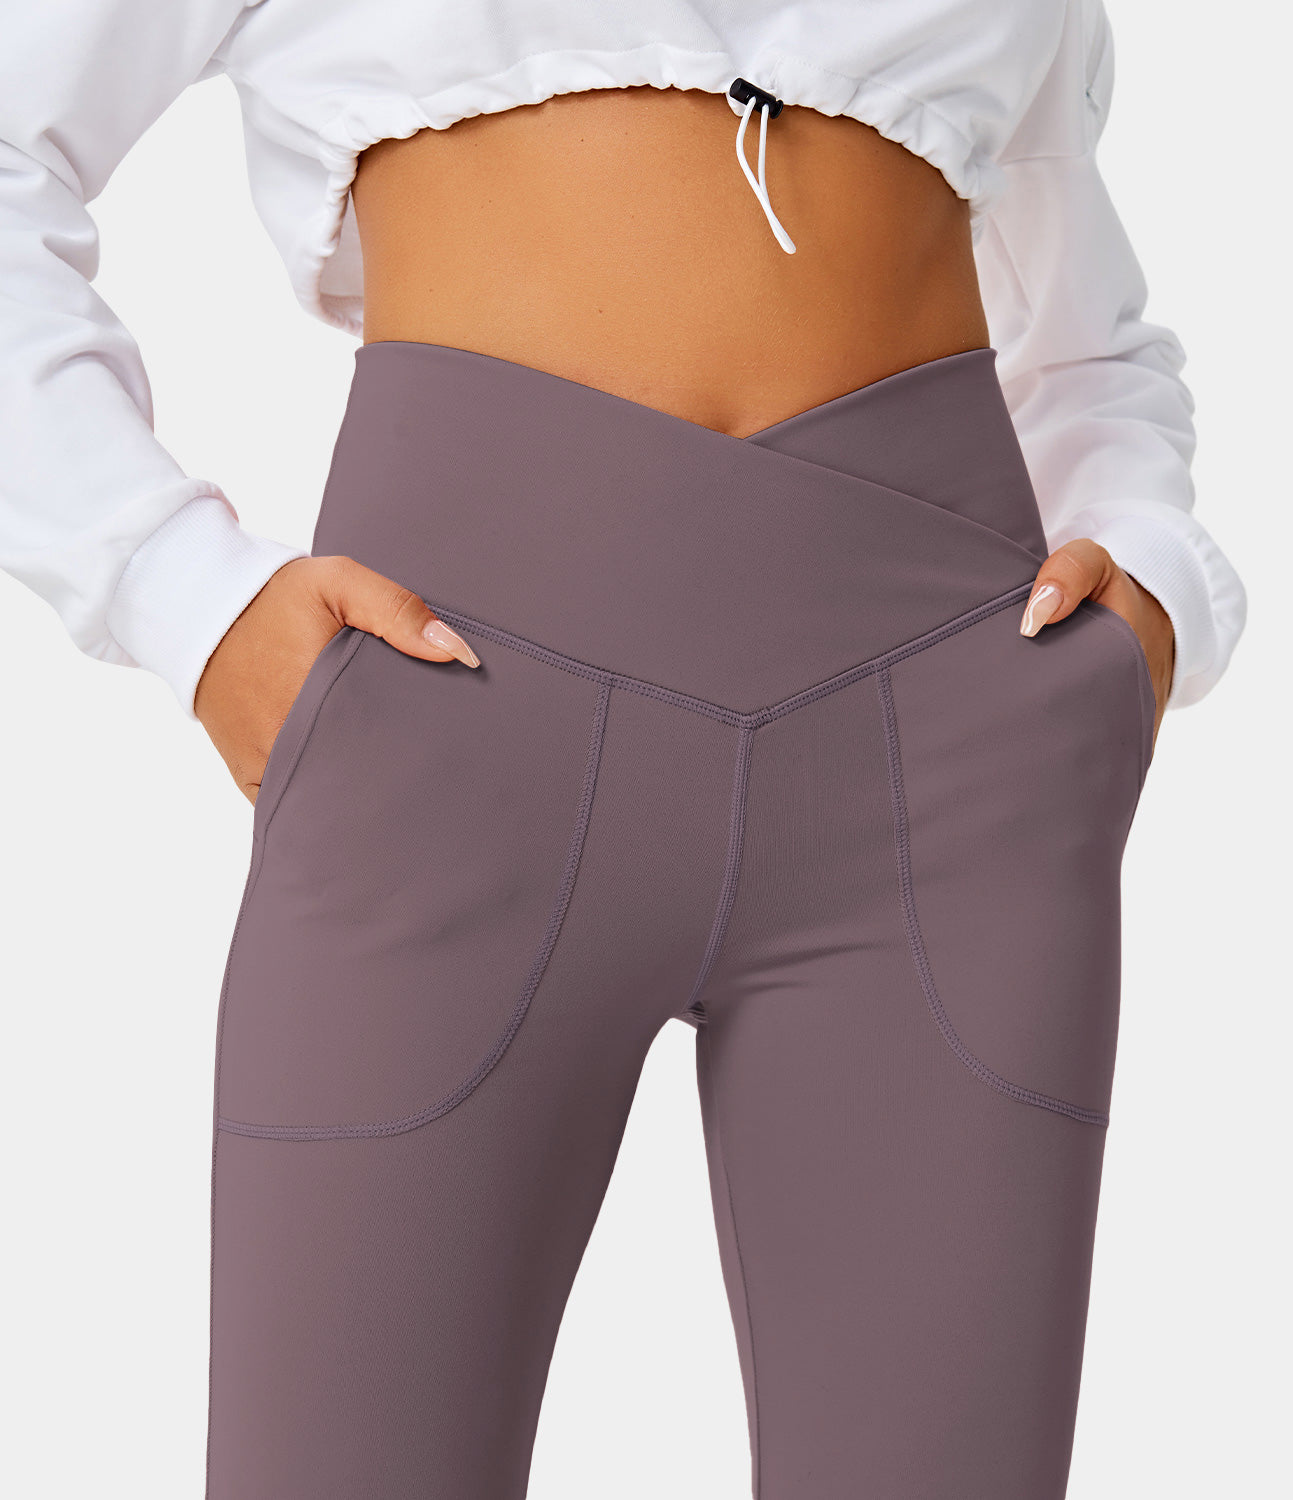 Skyface High Waisted Crossover Leggings for Women, Tummy Control